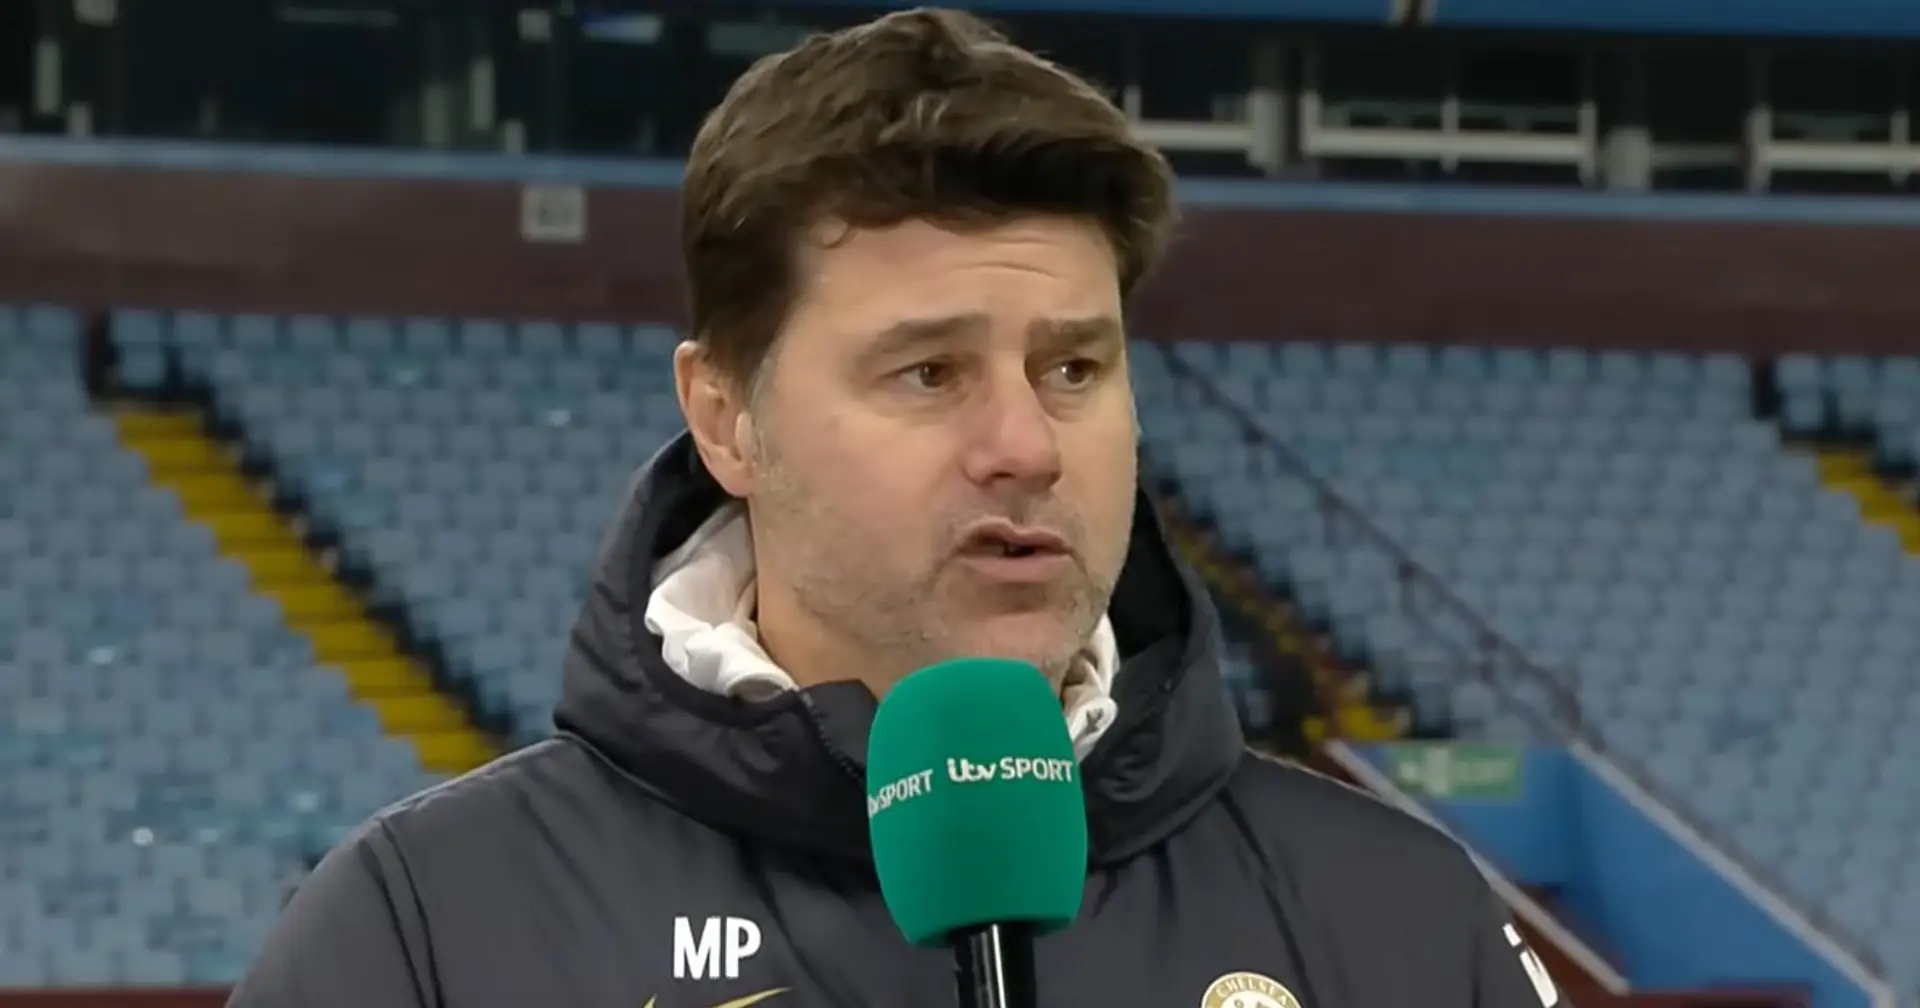 'This is not magic cream': Poch sends message on Chelsea's progress after narrow Leeds United win